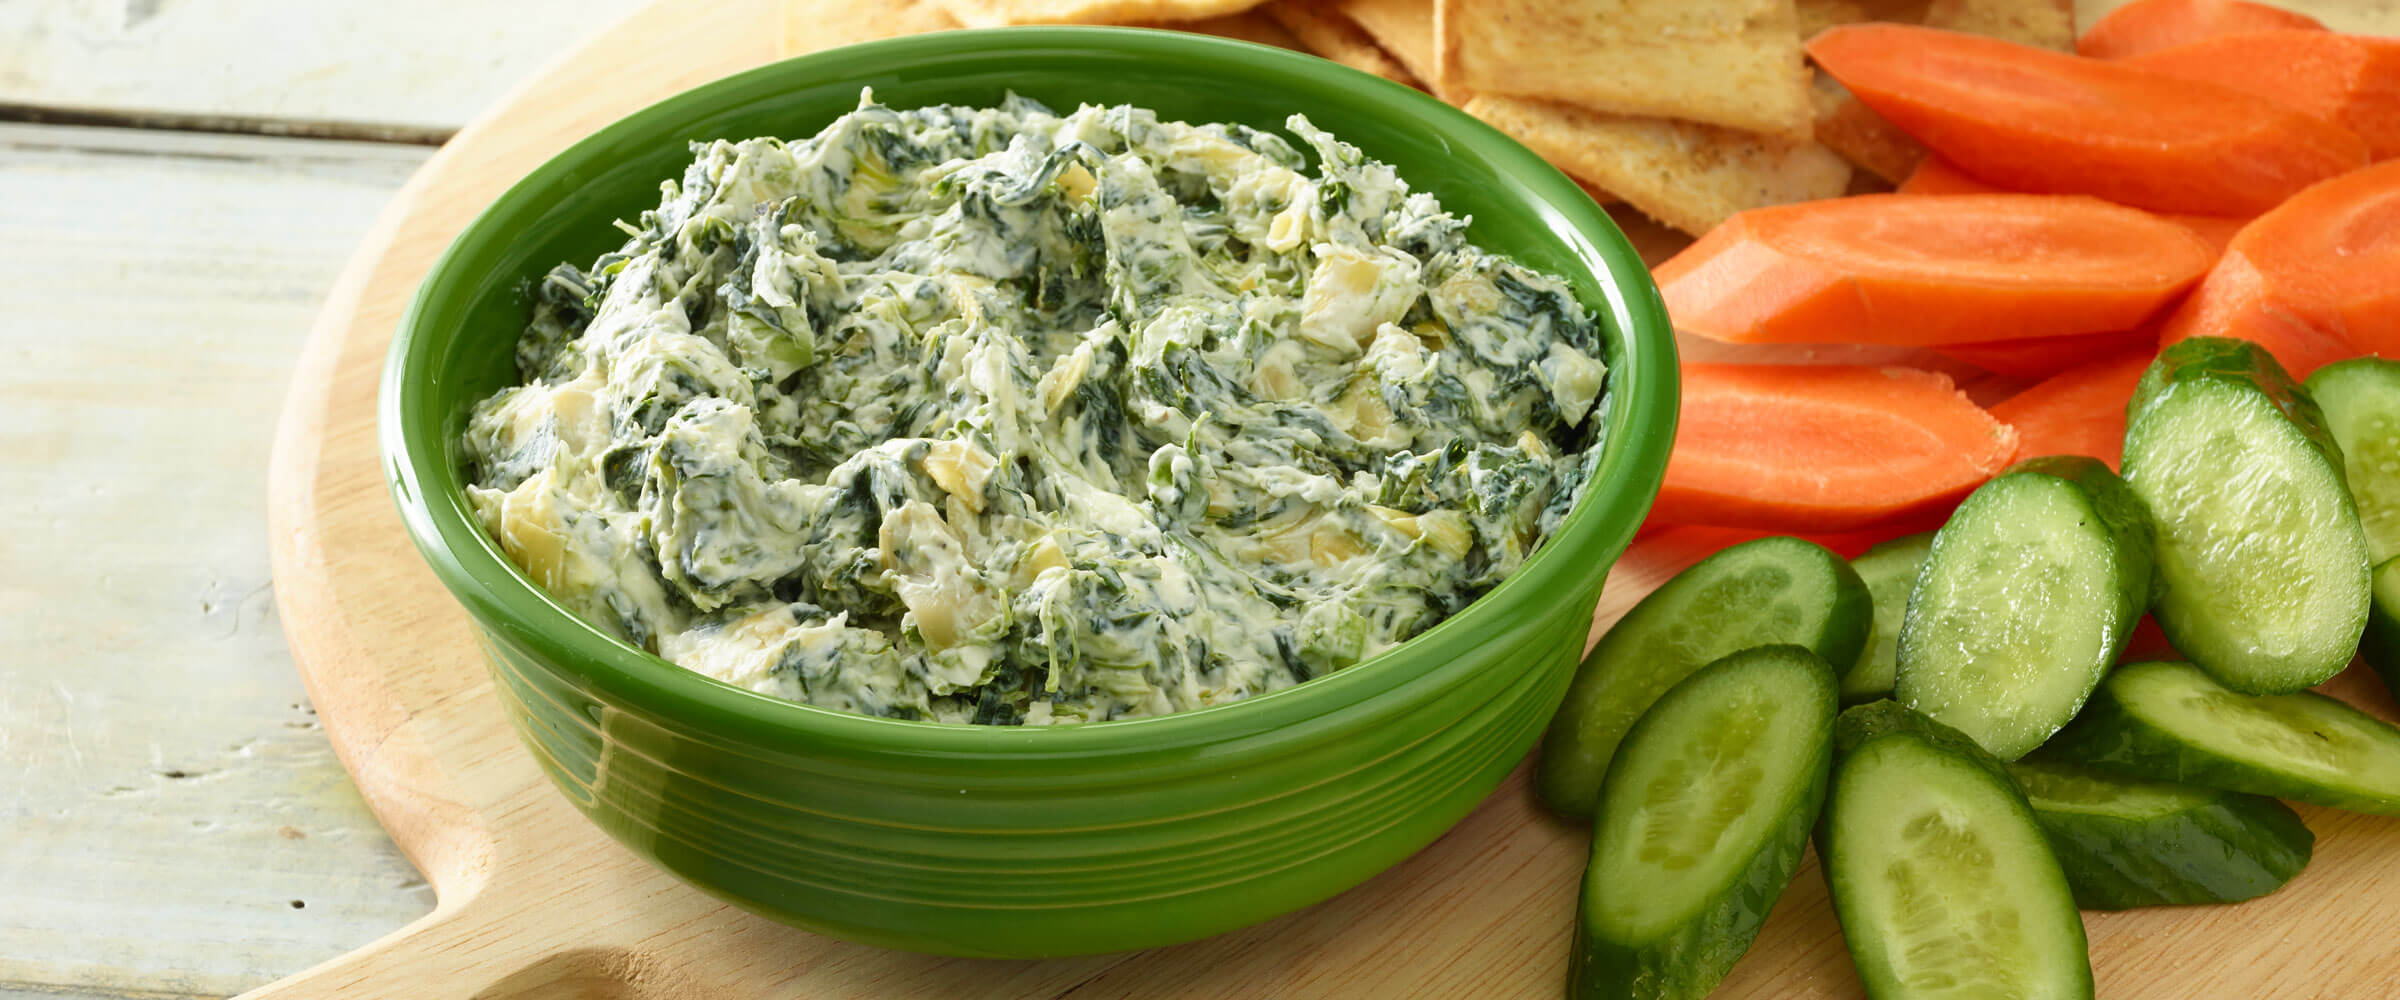 Spinach and Artichoke dip in green bowl with cucumber and carrot dippers